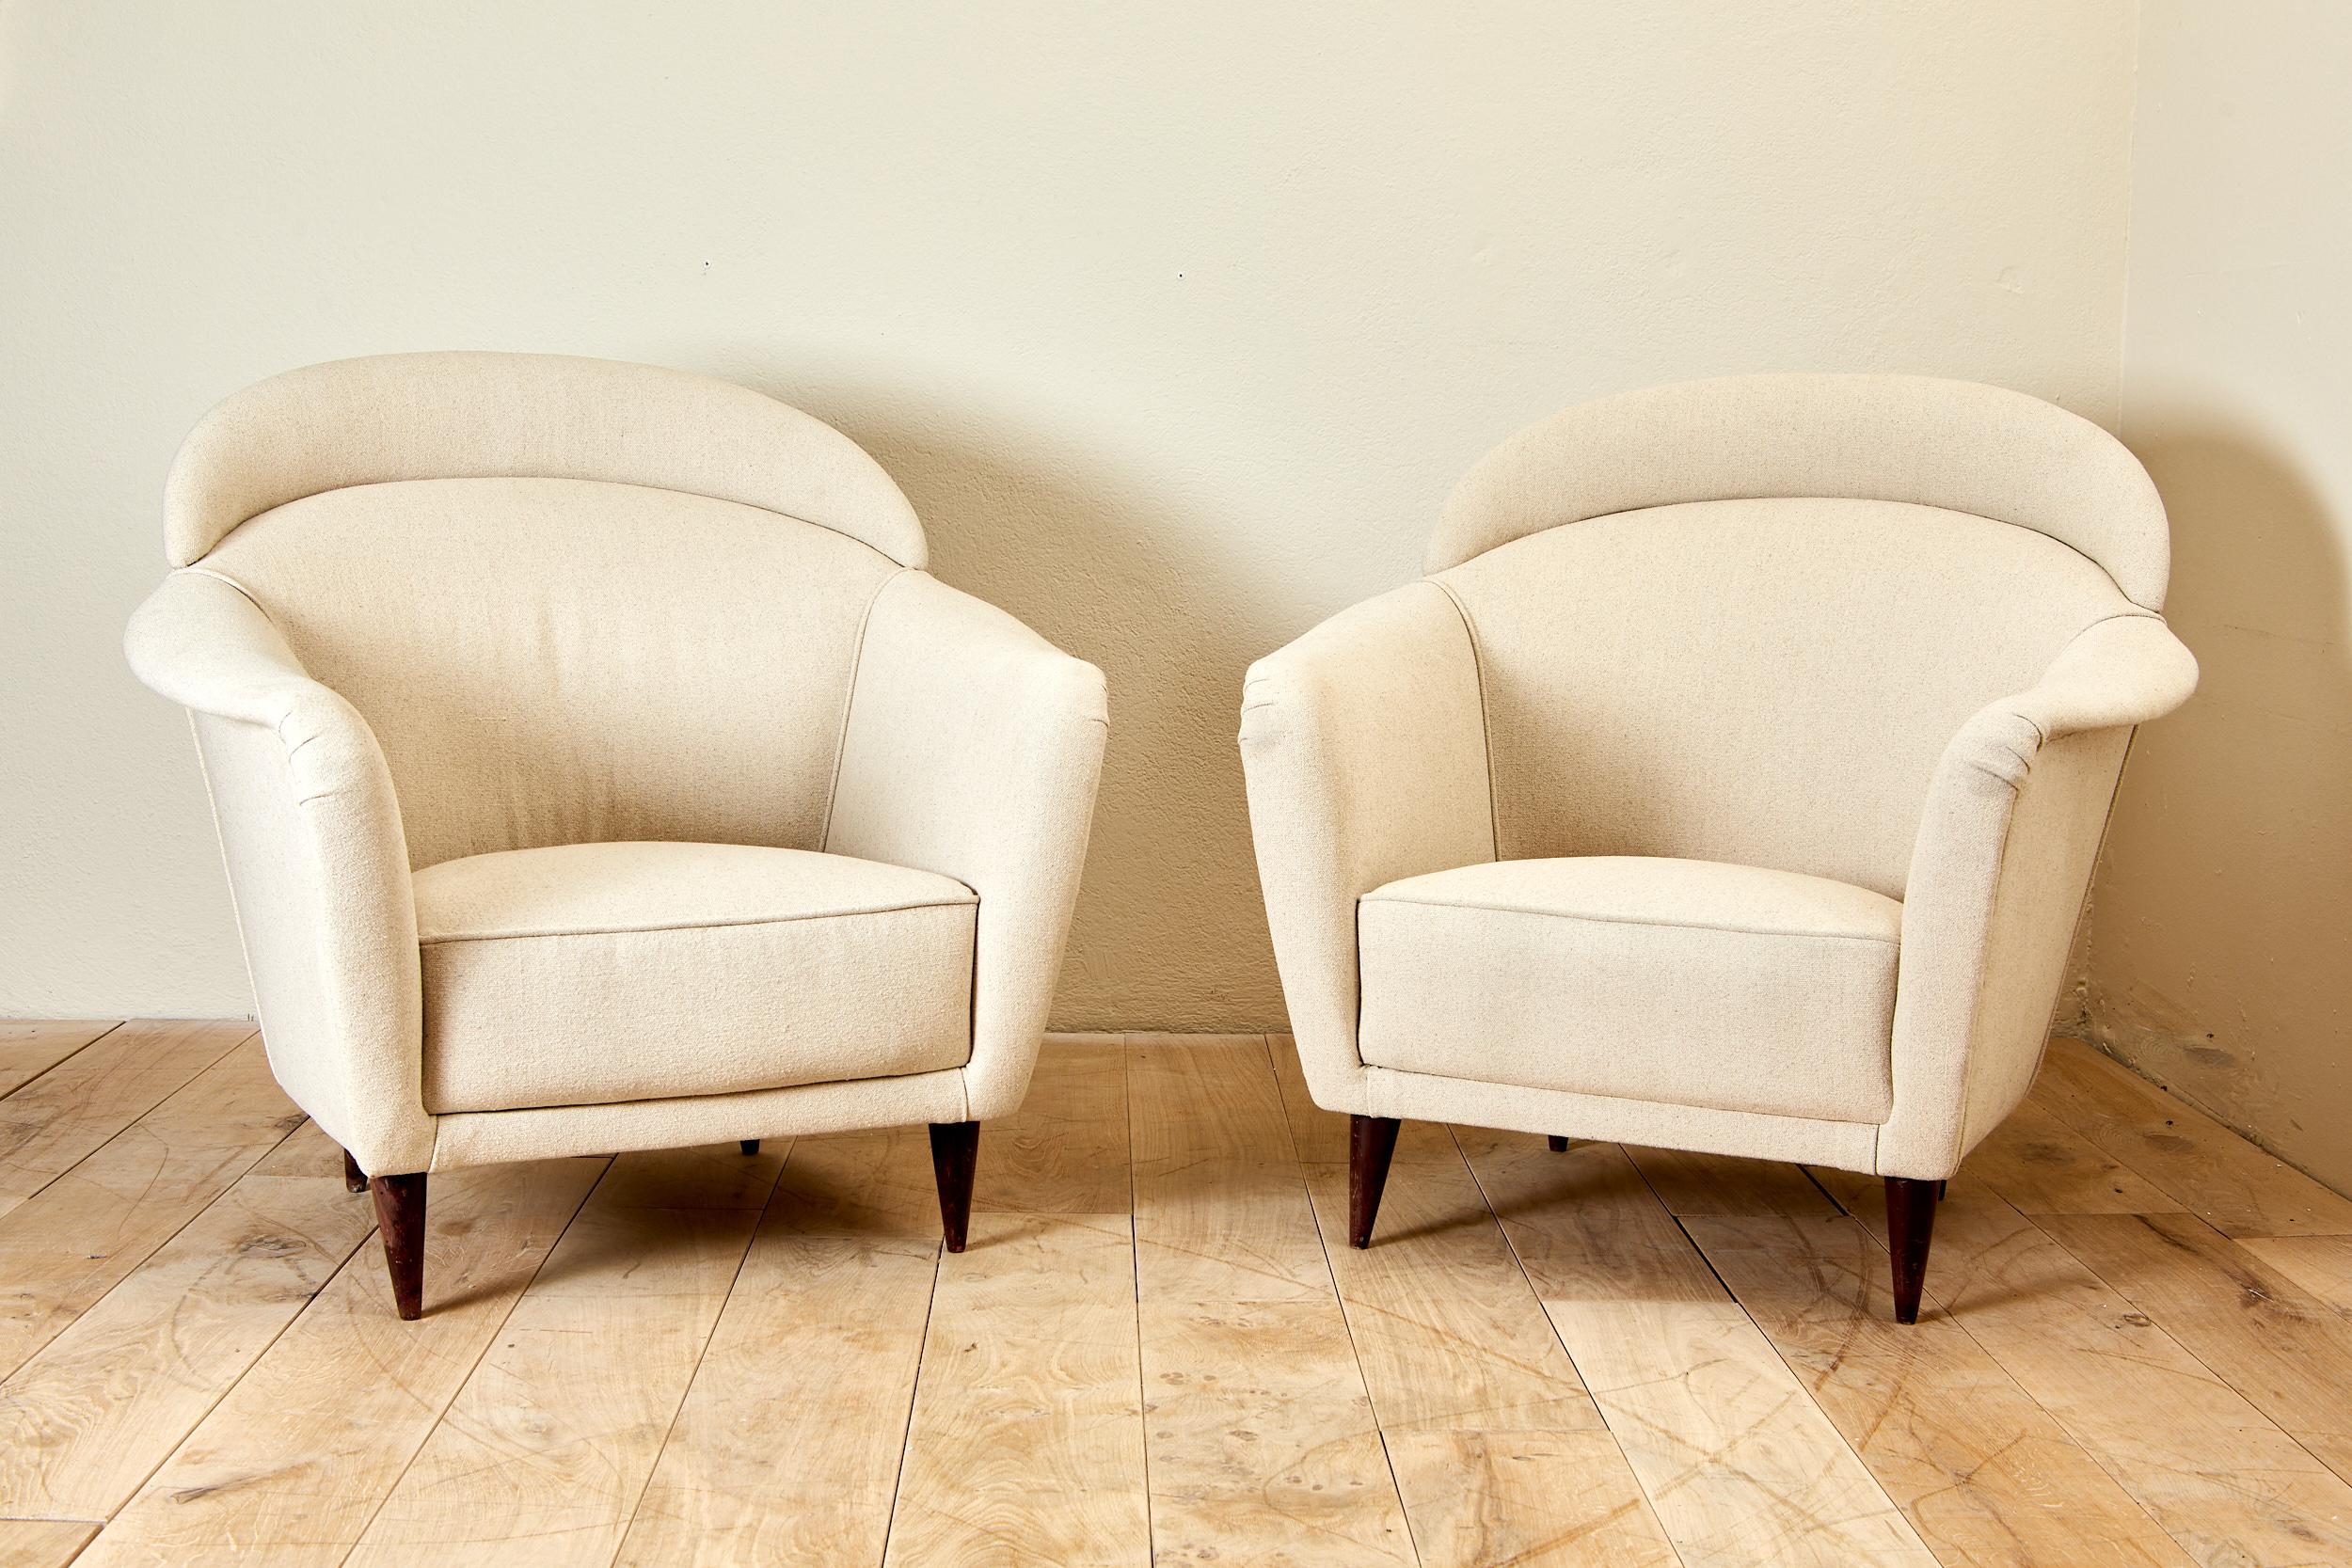 Pair of armchairs, 
wood and cotton, 
circa 1970, Italy.
Height 85 cm, seat height 35 cm, width 90 cm, depth 85 cm.